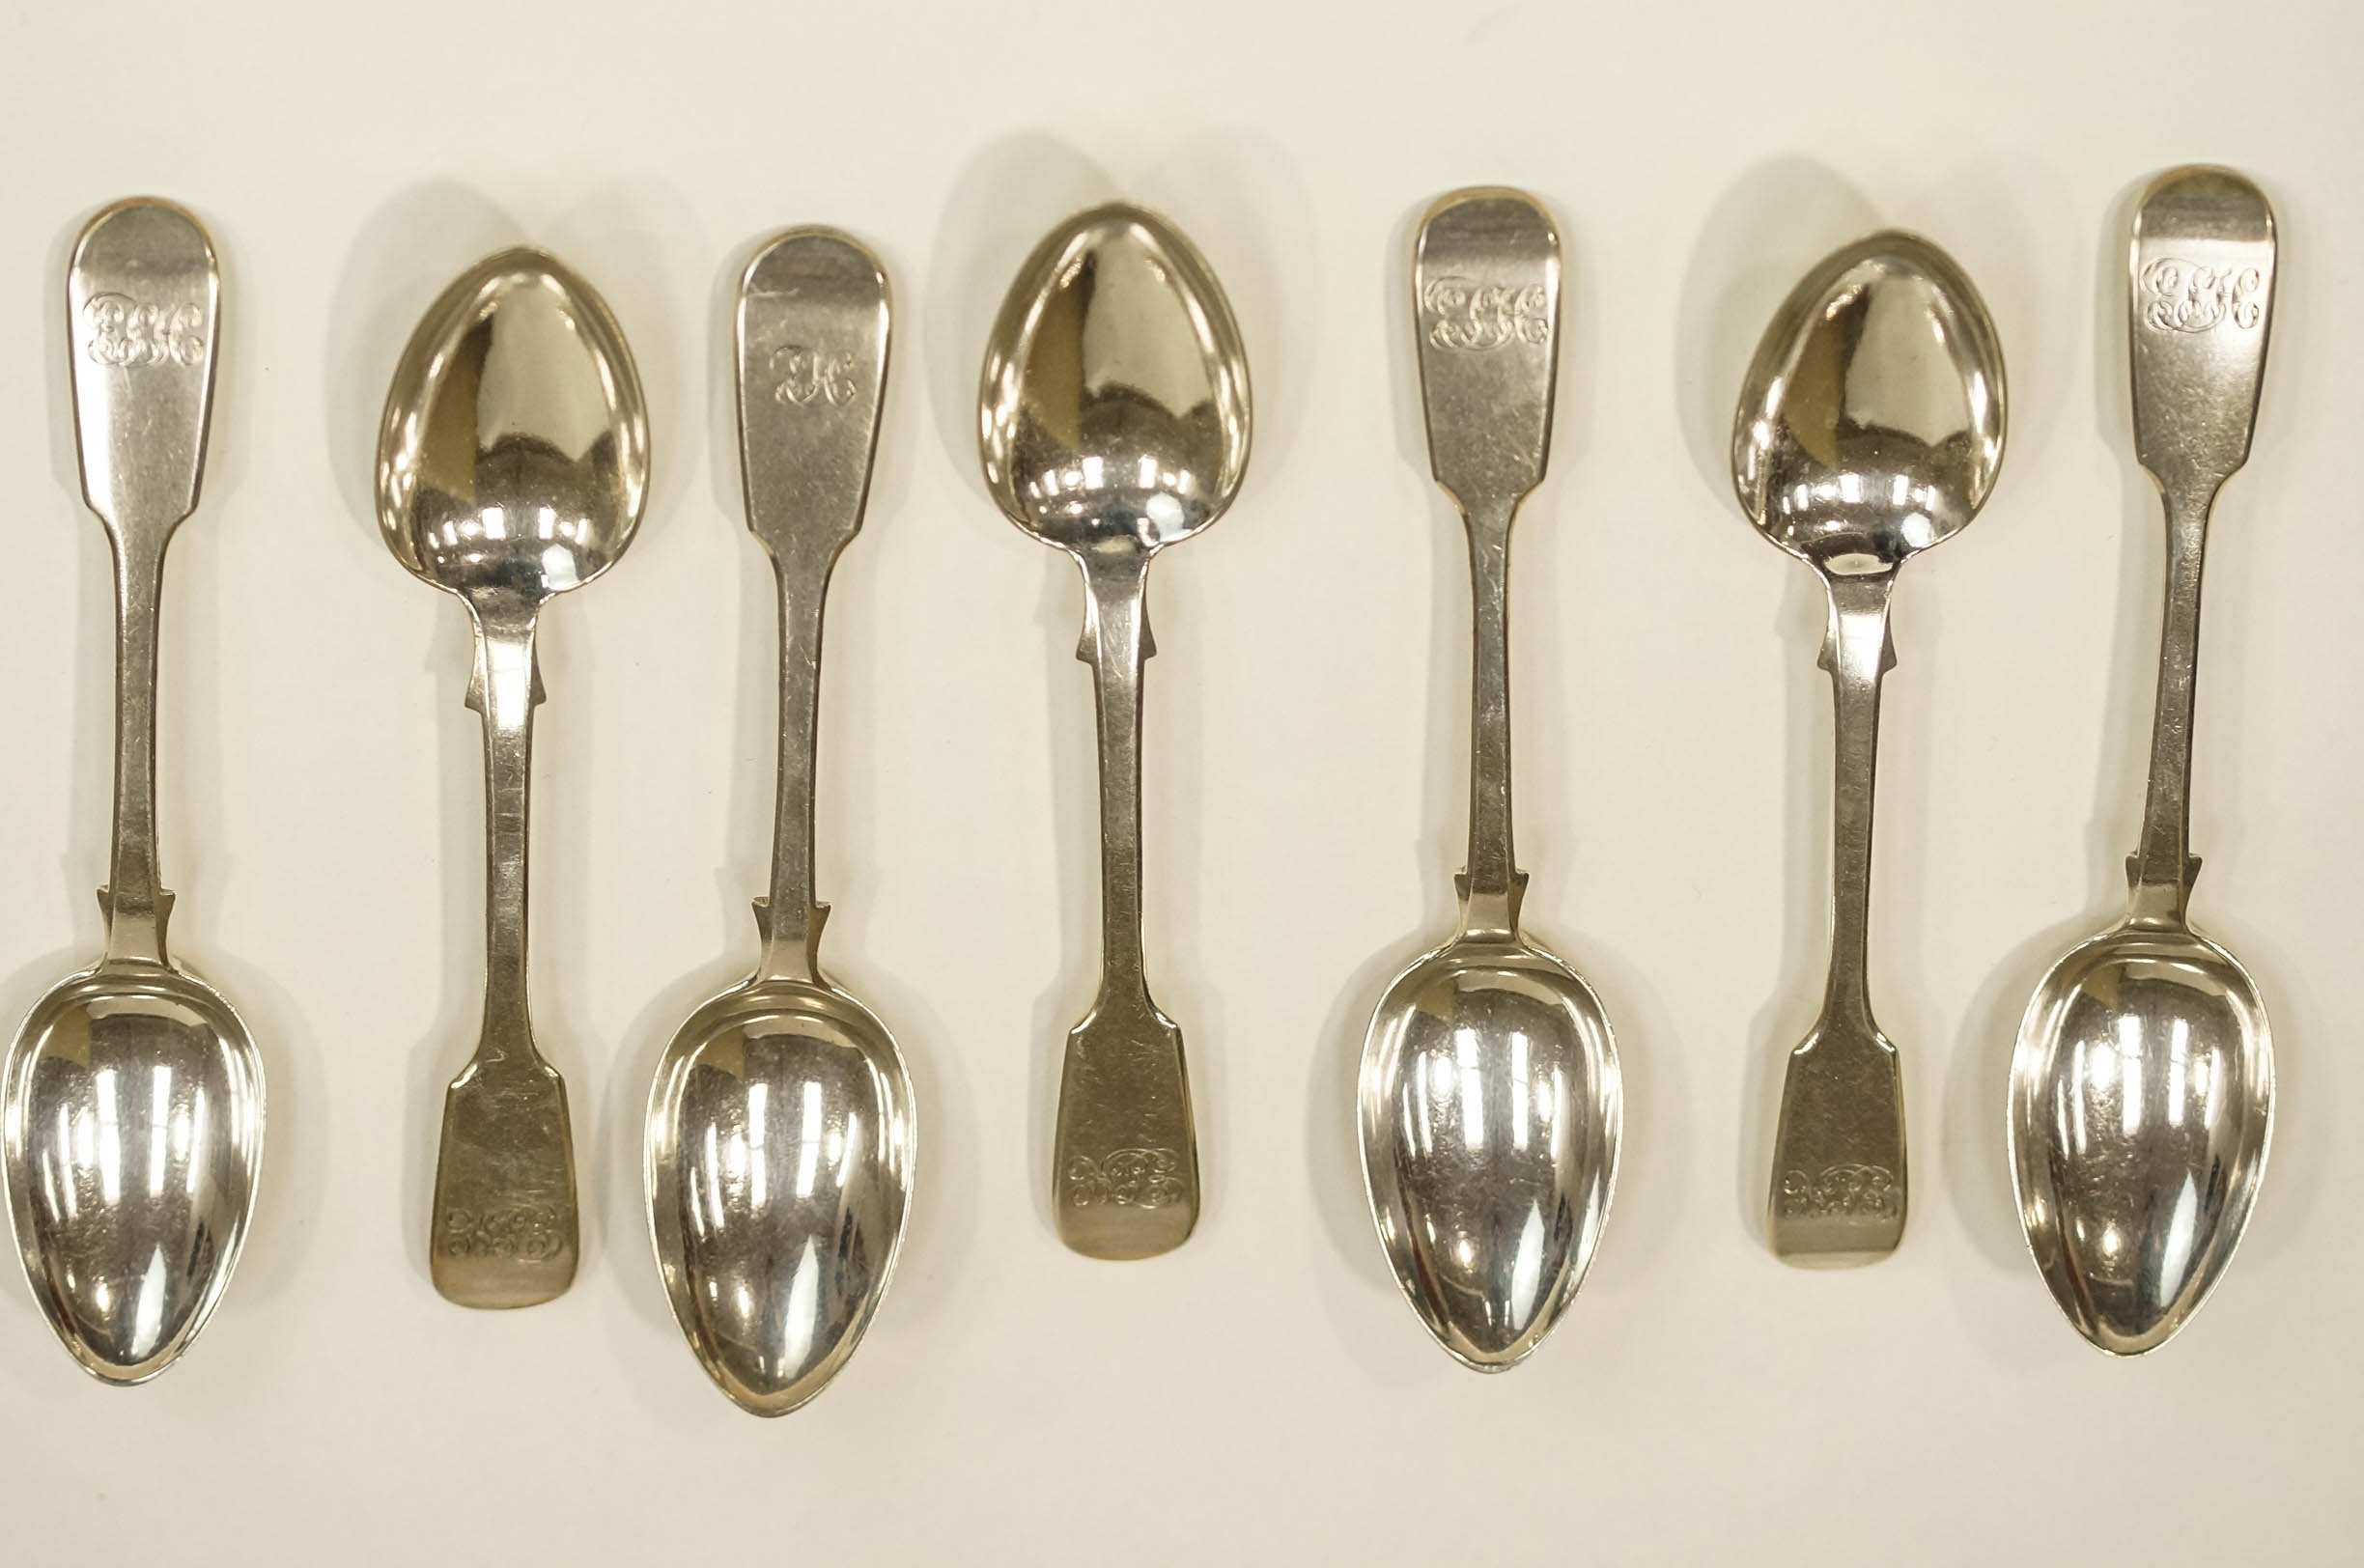 A matched set of six Victorian silver dessert spoons, by William Eley, London 1842/44,